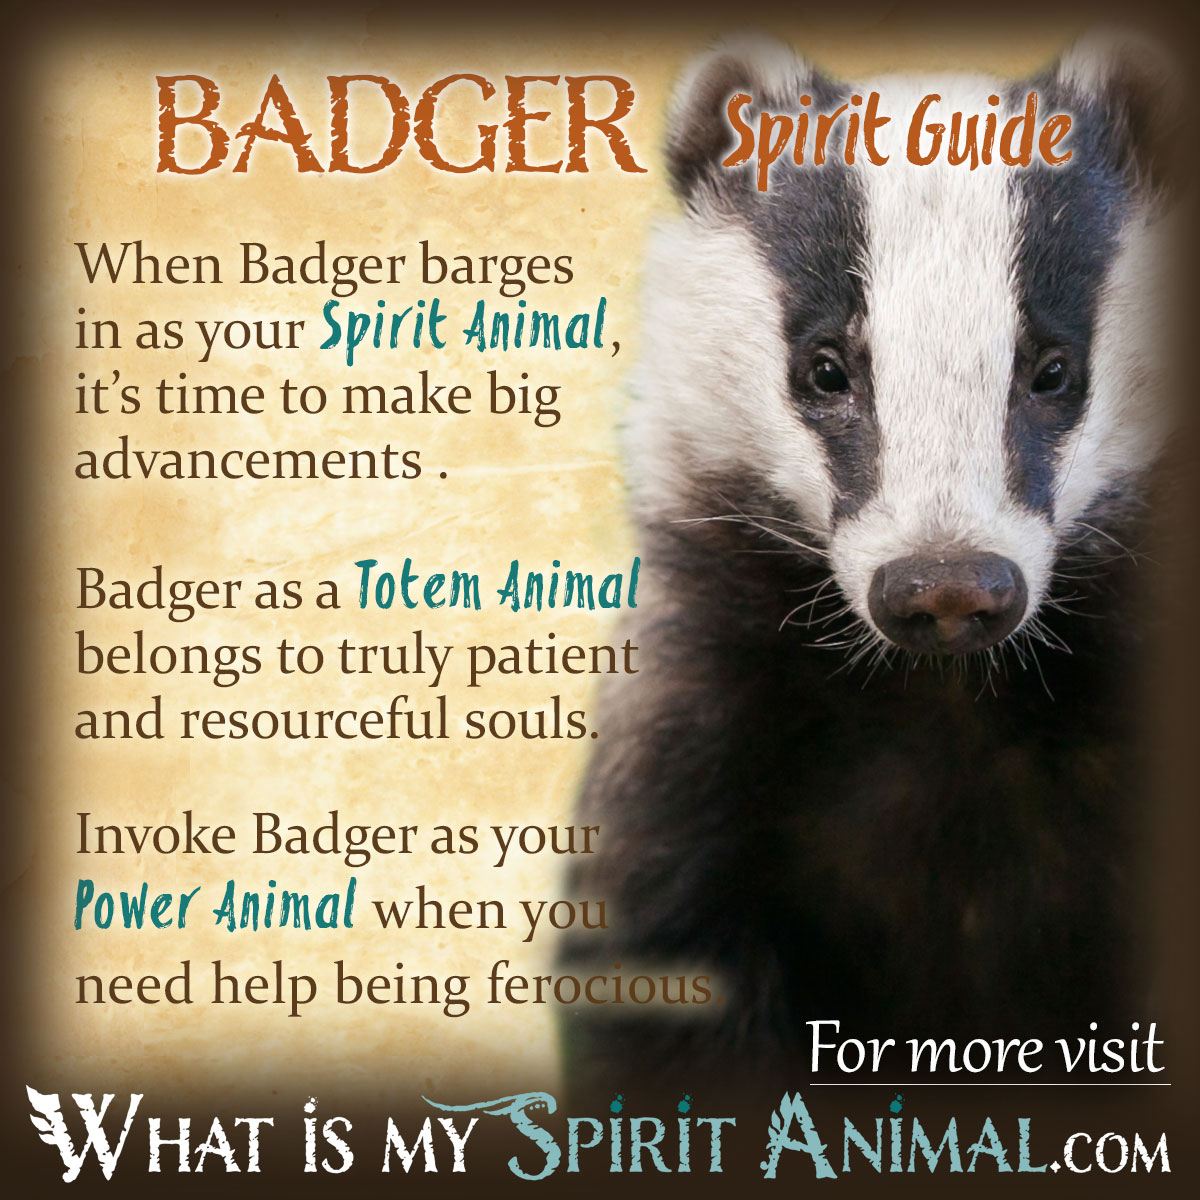 What is the personality of a badger?